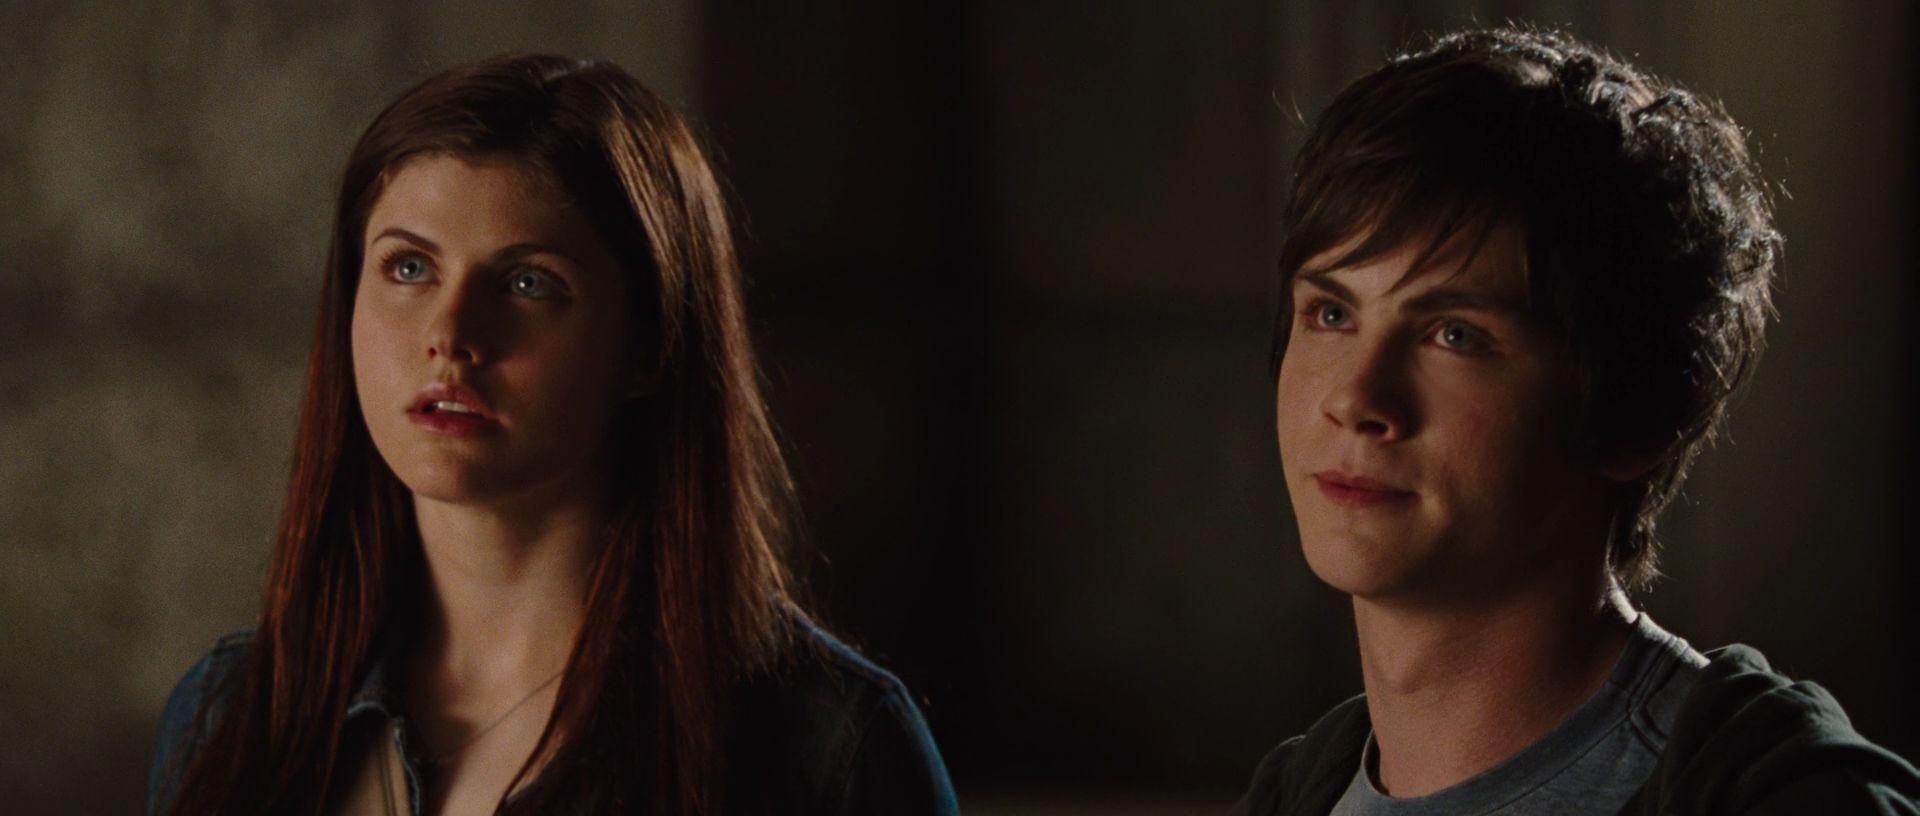 Percy Jackson And Annabeth Chase image Percy Jackson And